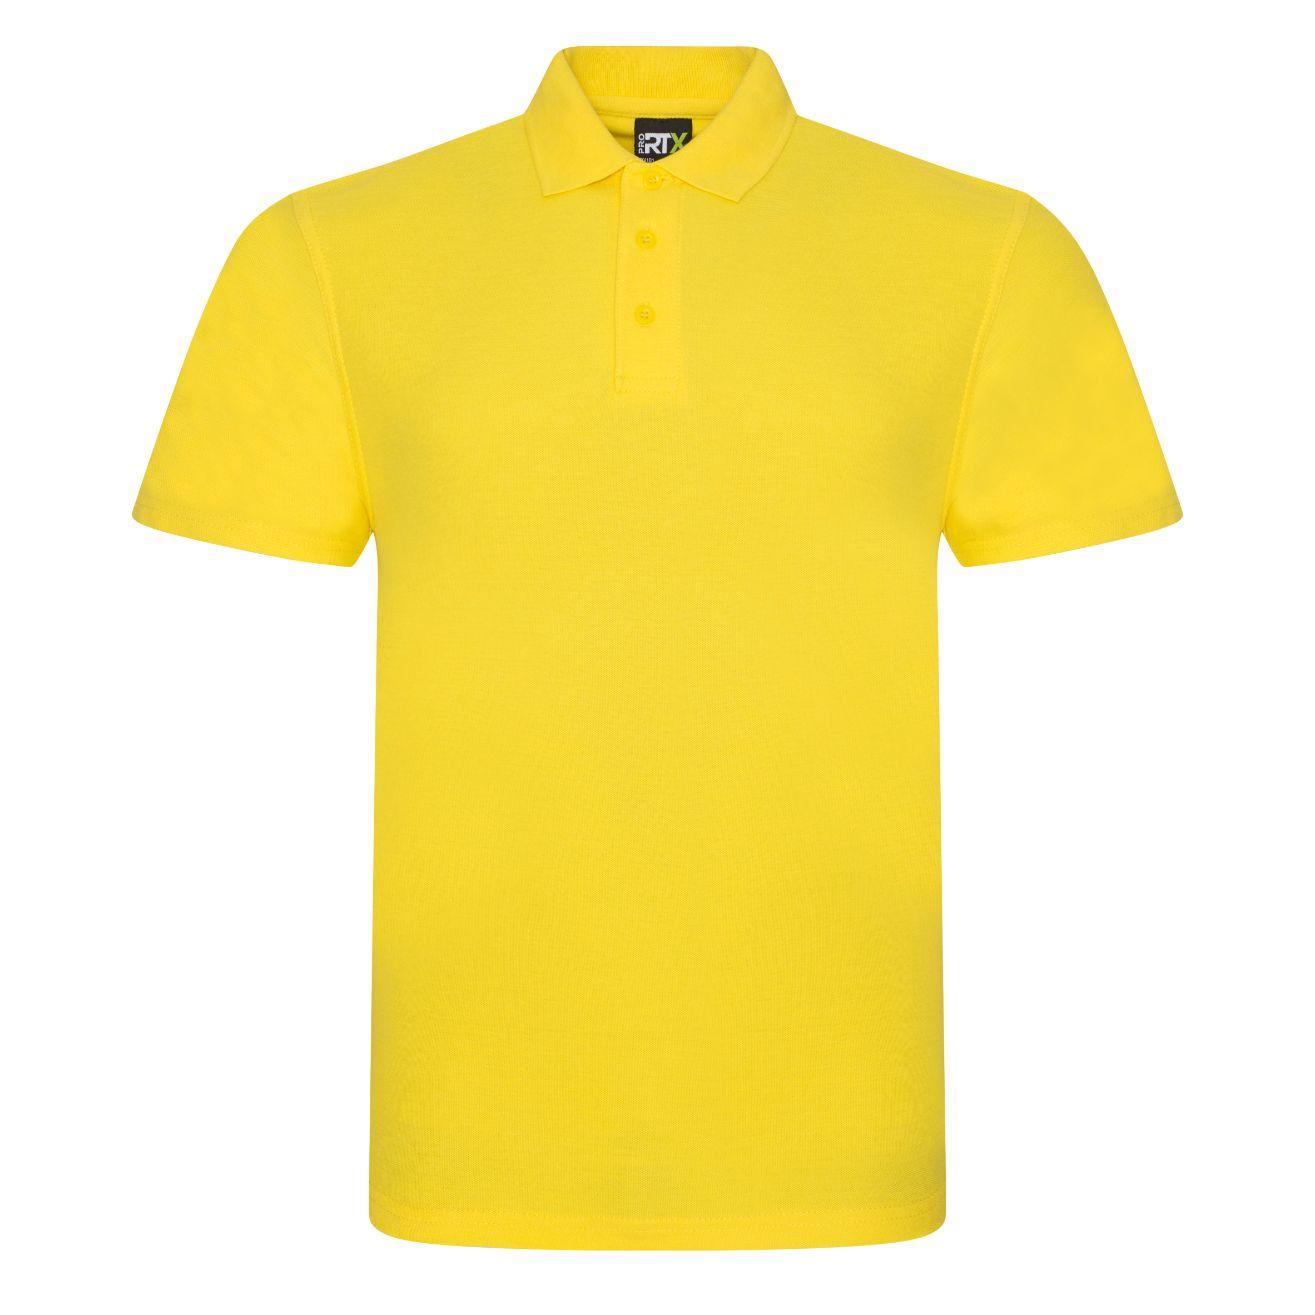 RX101 Pro RTX Pro Piqué Polo Shirt up to 8XL can have your logo ...